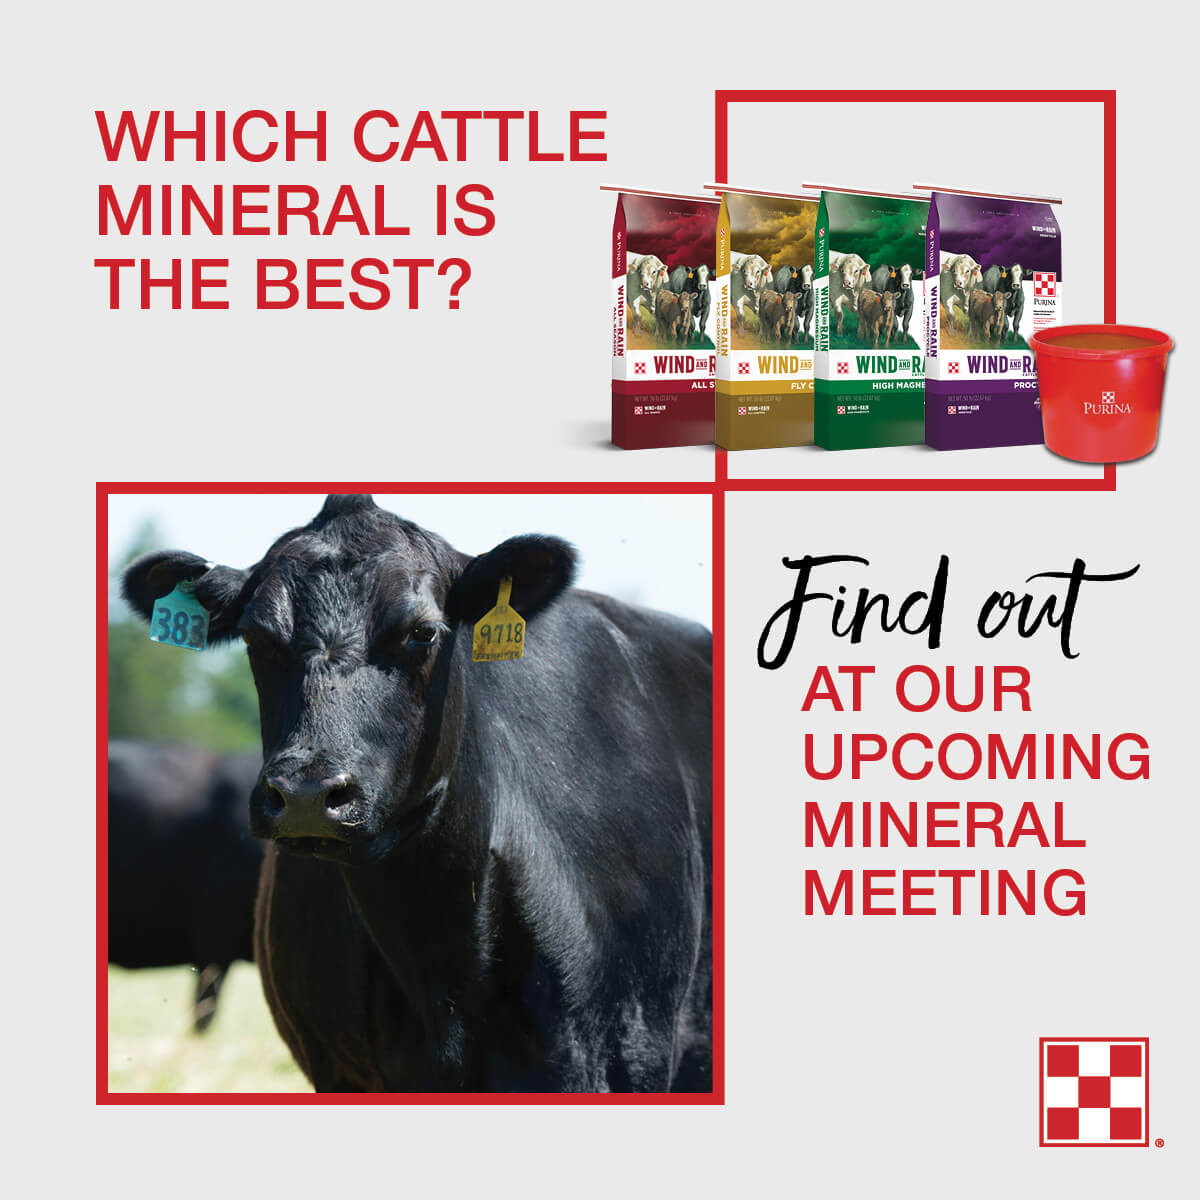 cattle mineral